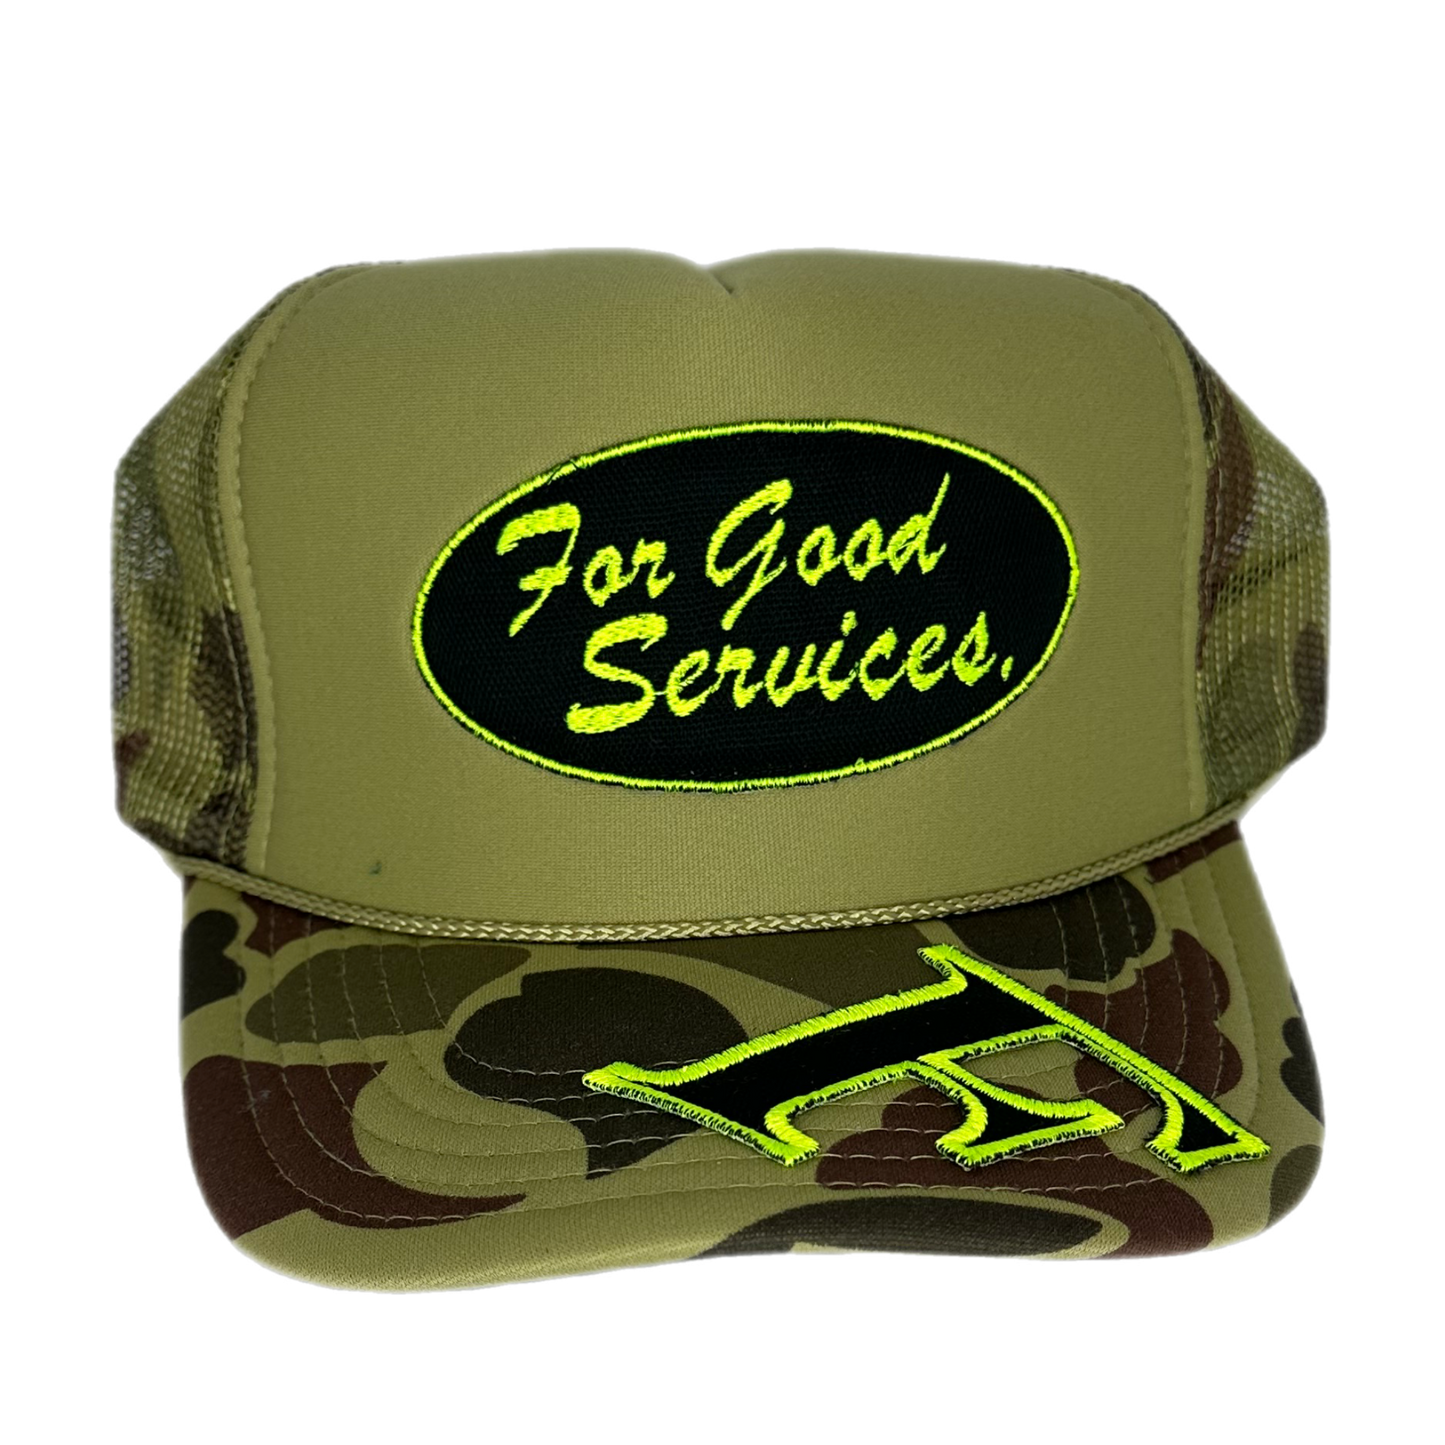 For Good Services - "Camo Trucker Hat" - Brown